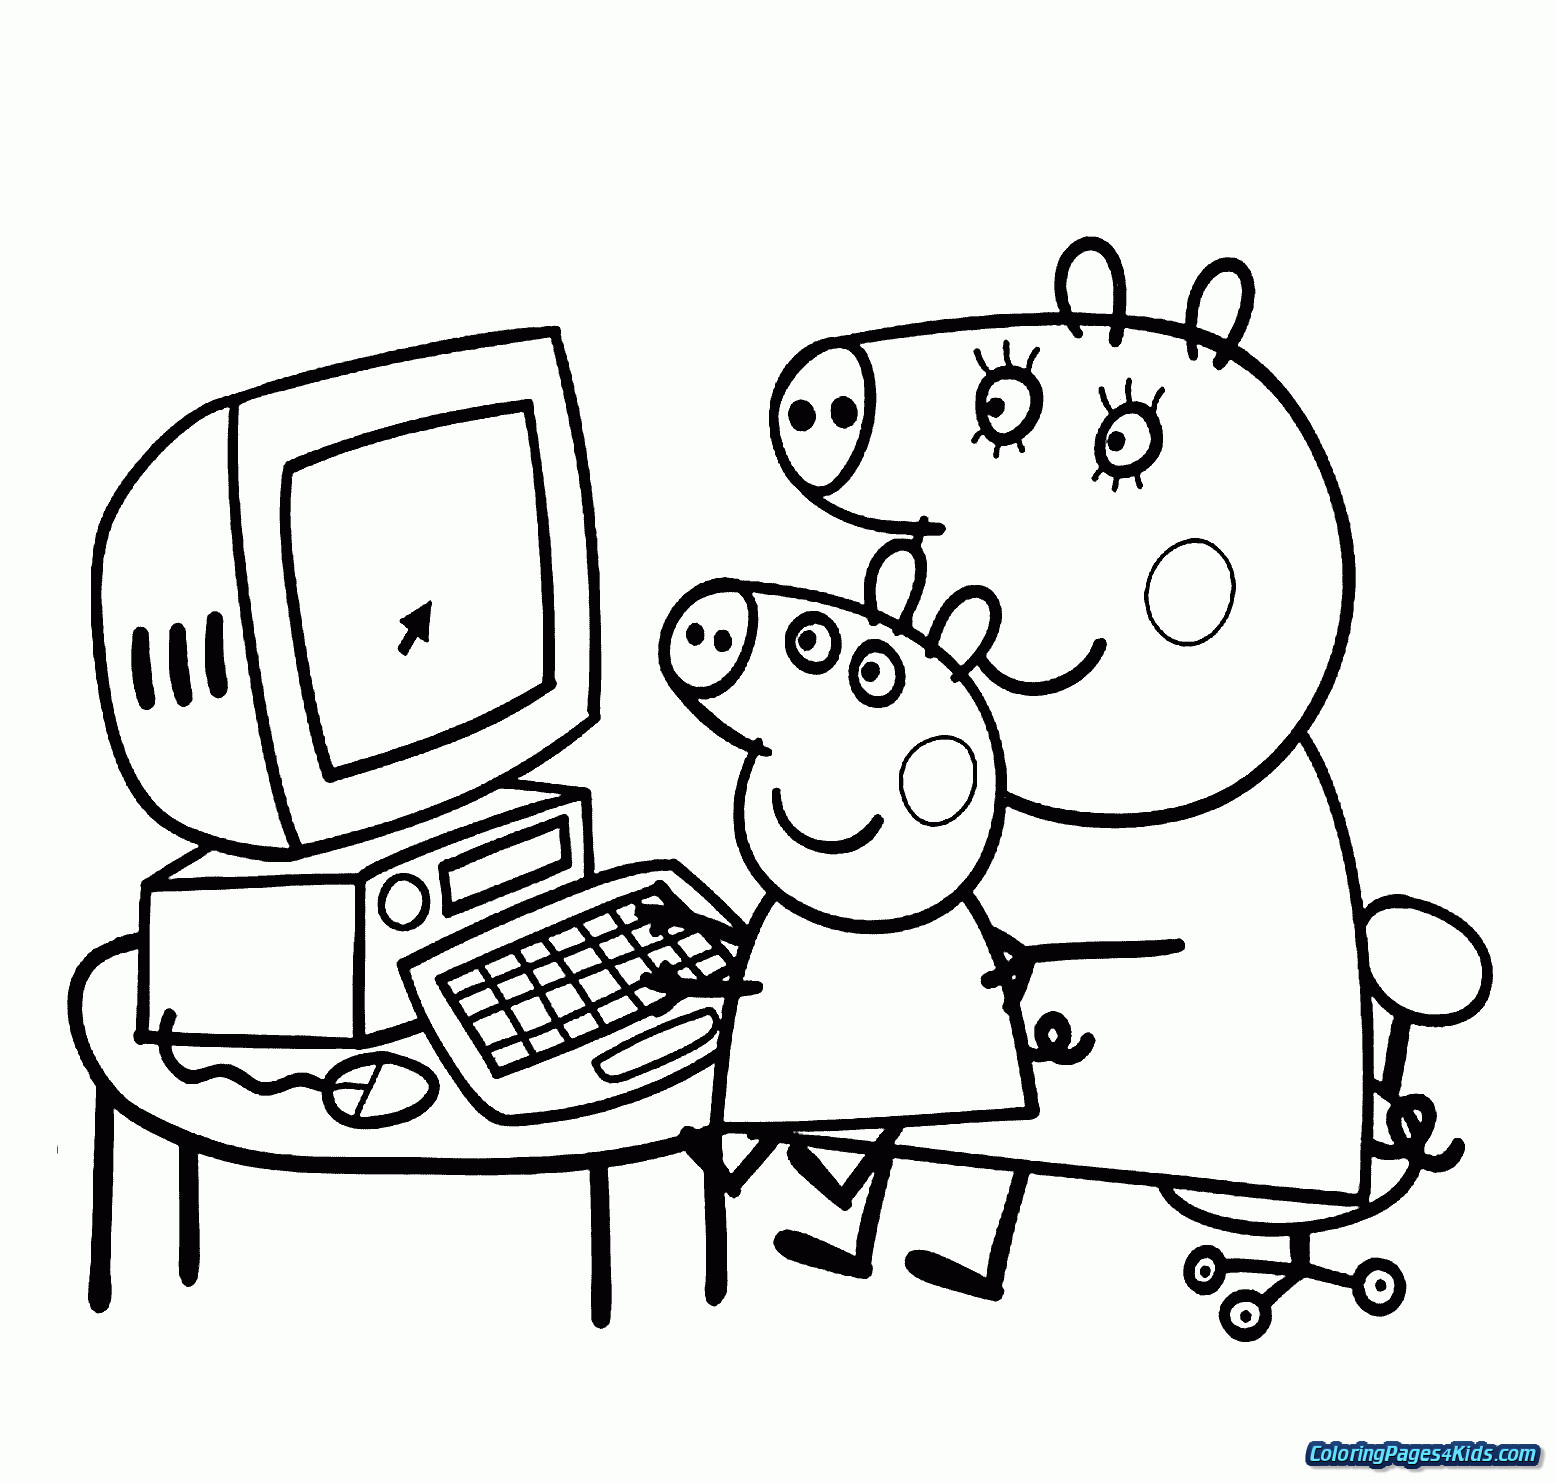 Peppa Pig Coloring Pages For Kids
 peppa pig birthday coloring pages Coloring Pages For Kids